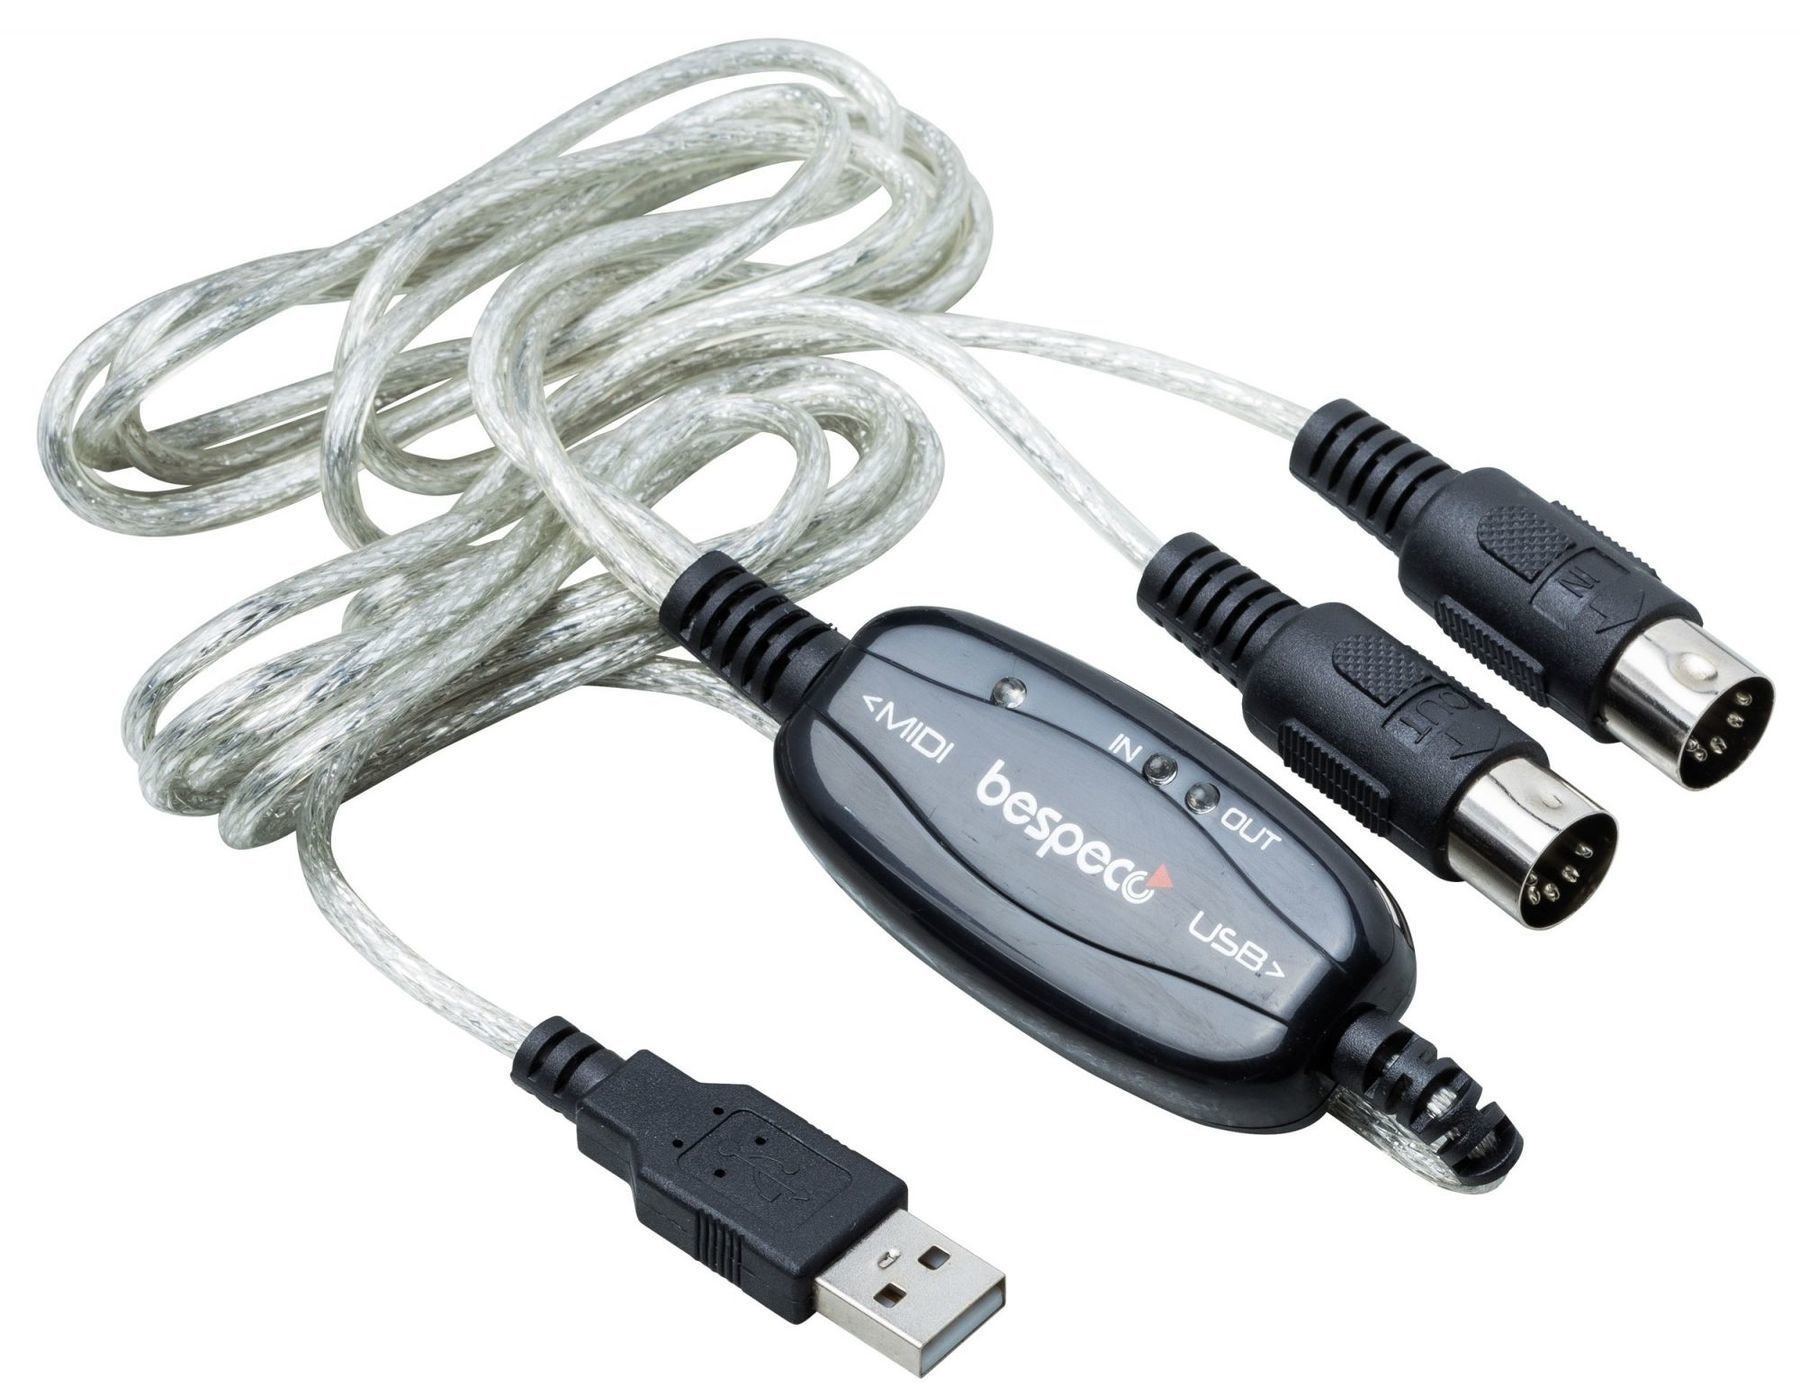 USB Cable Bespeco BMUSB100 Transparent 2 m USB Cable